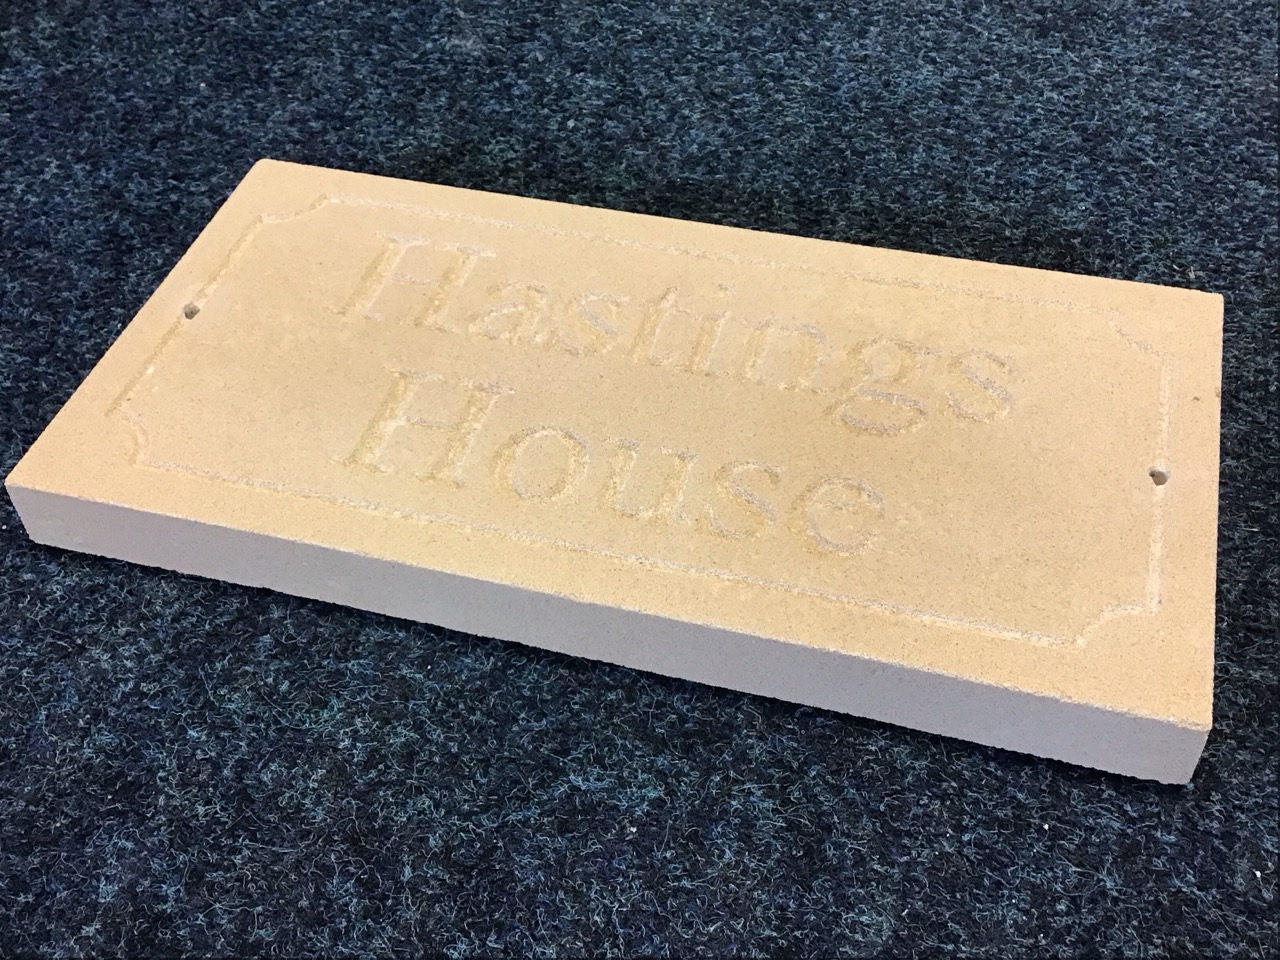 A sandstone slab carved with house name in panel - Hastings House. (15.75in x 8in) - Image 2 of 3